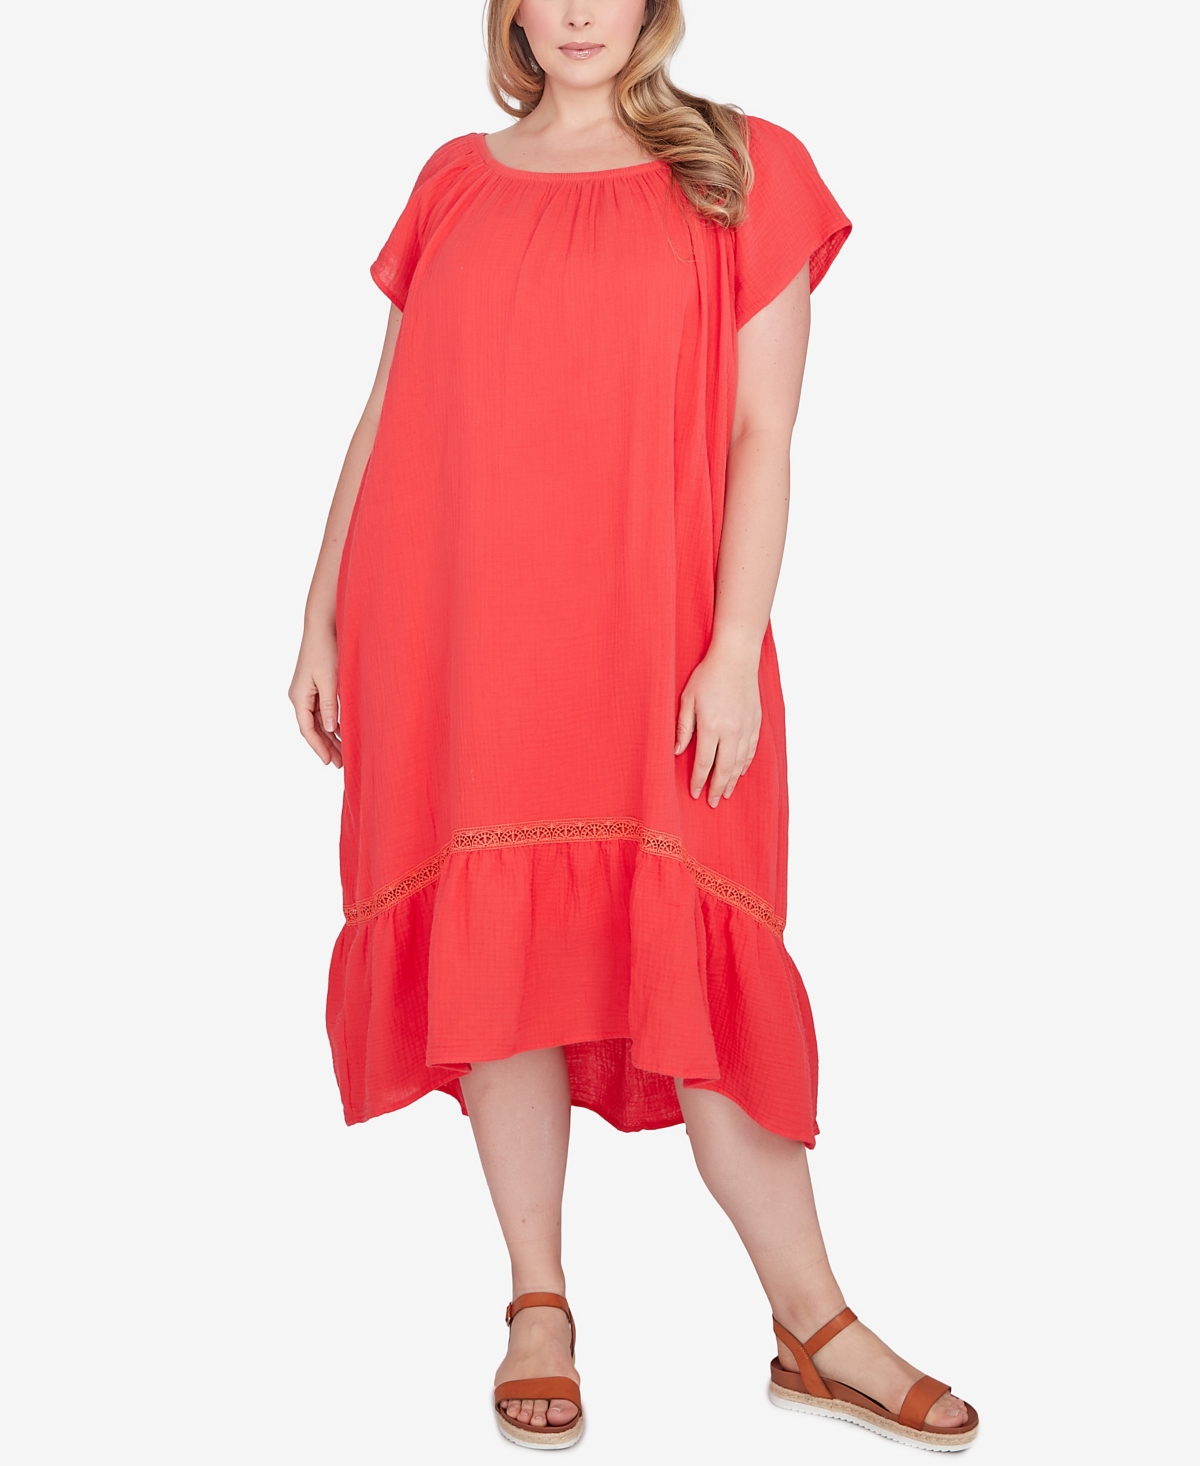 Ruby Rd. Plus Size Gauze High/low Cotton T-shirt Dress In Punch